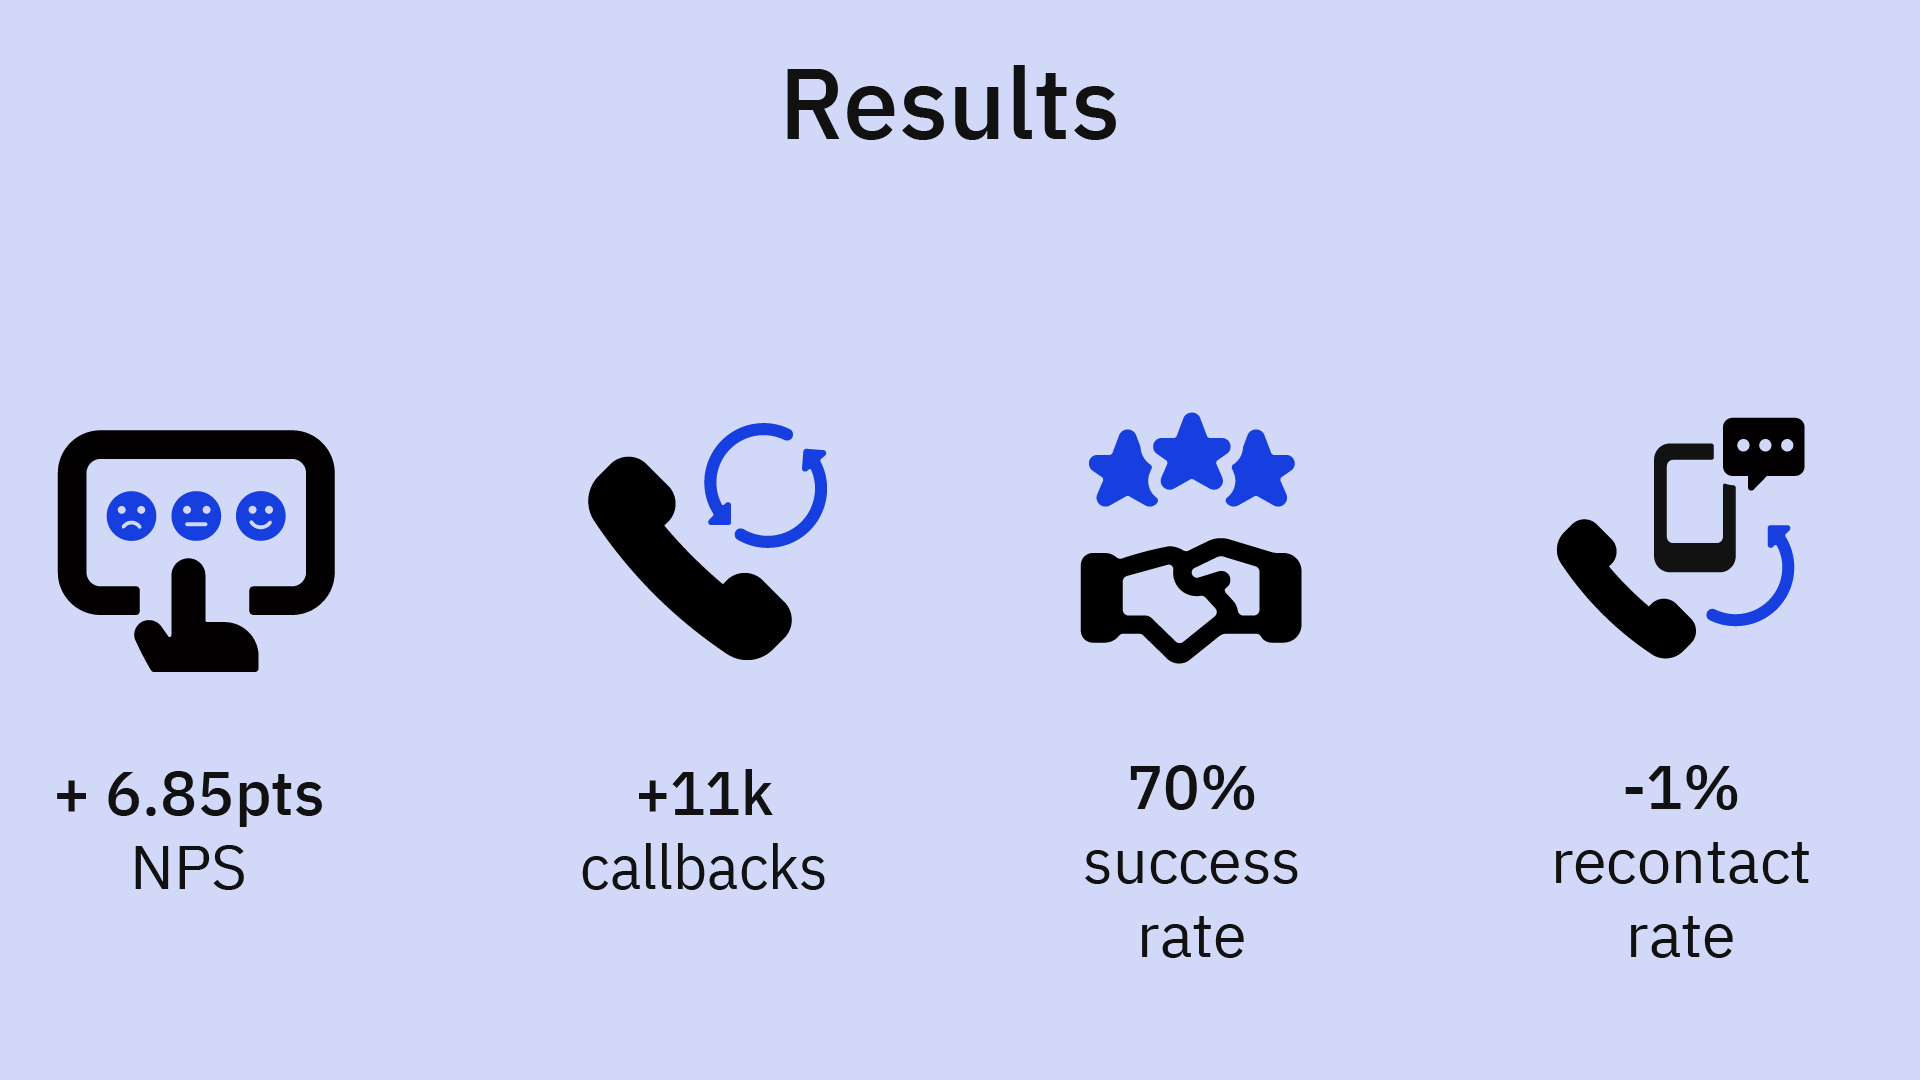 An infographic showing the results of conversational analytics implementation